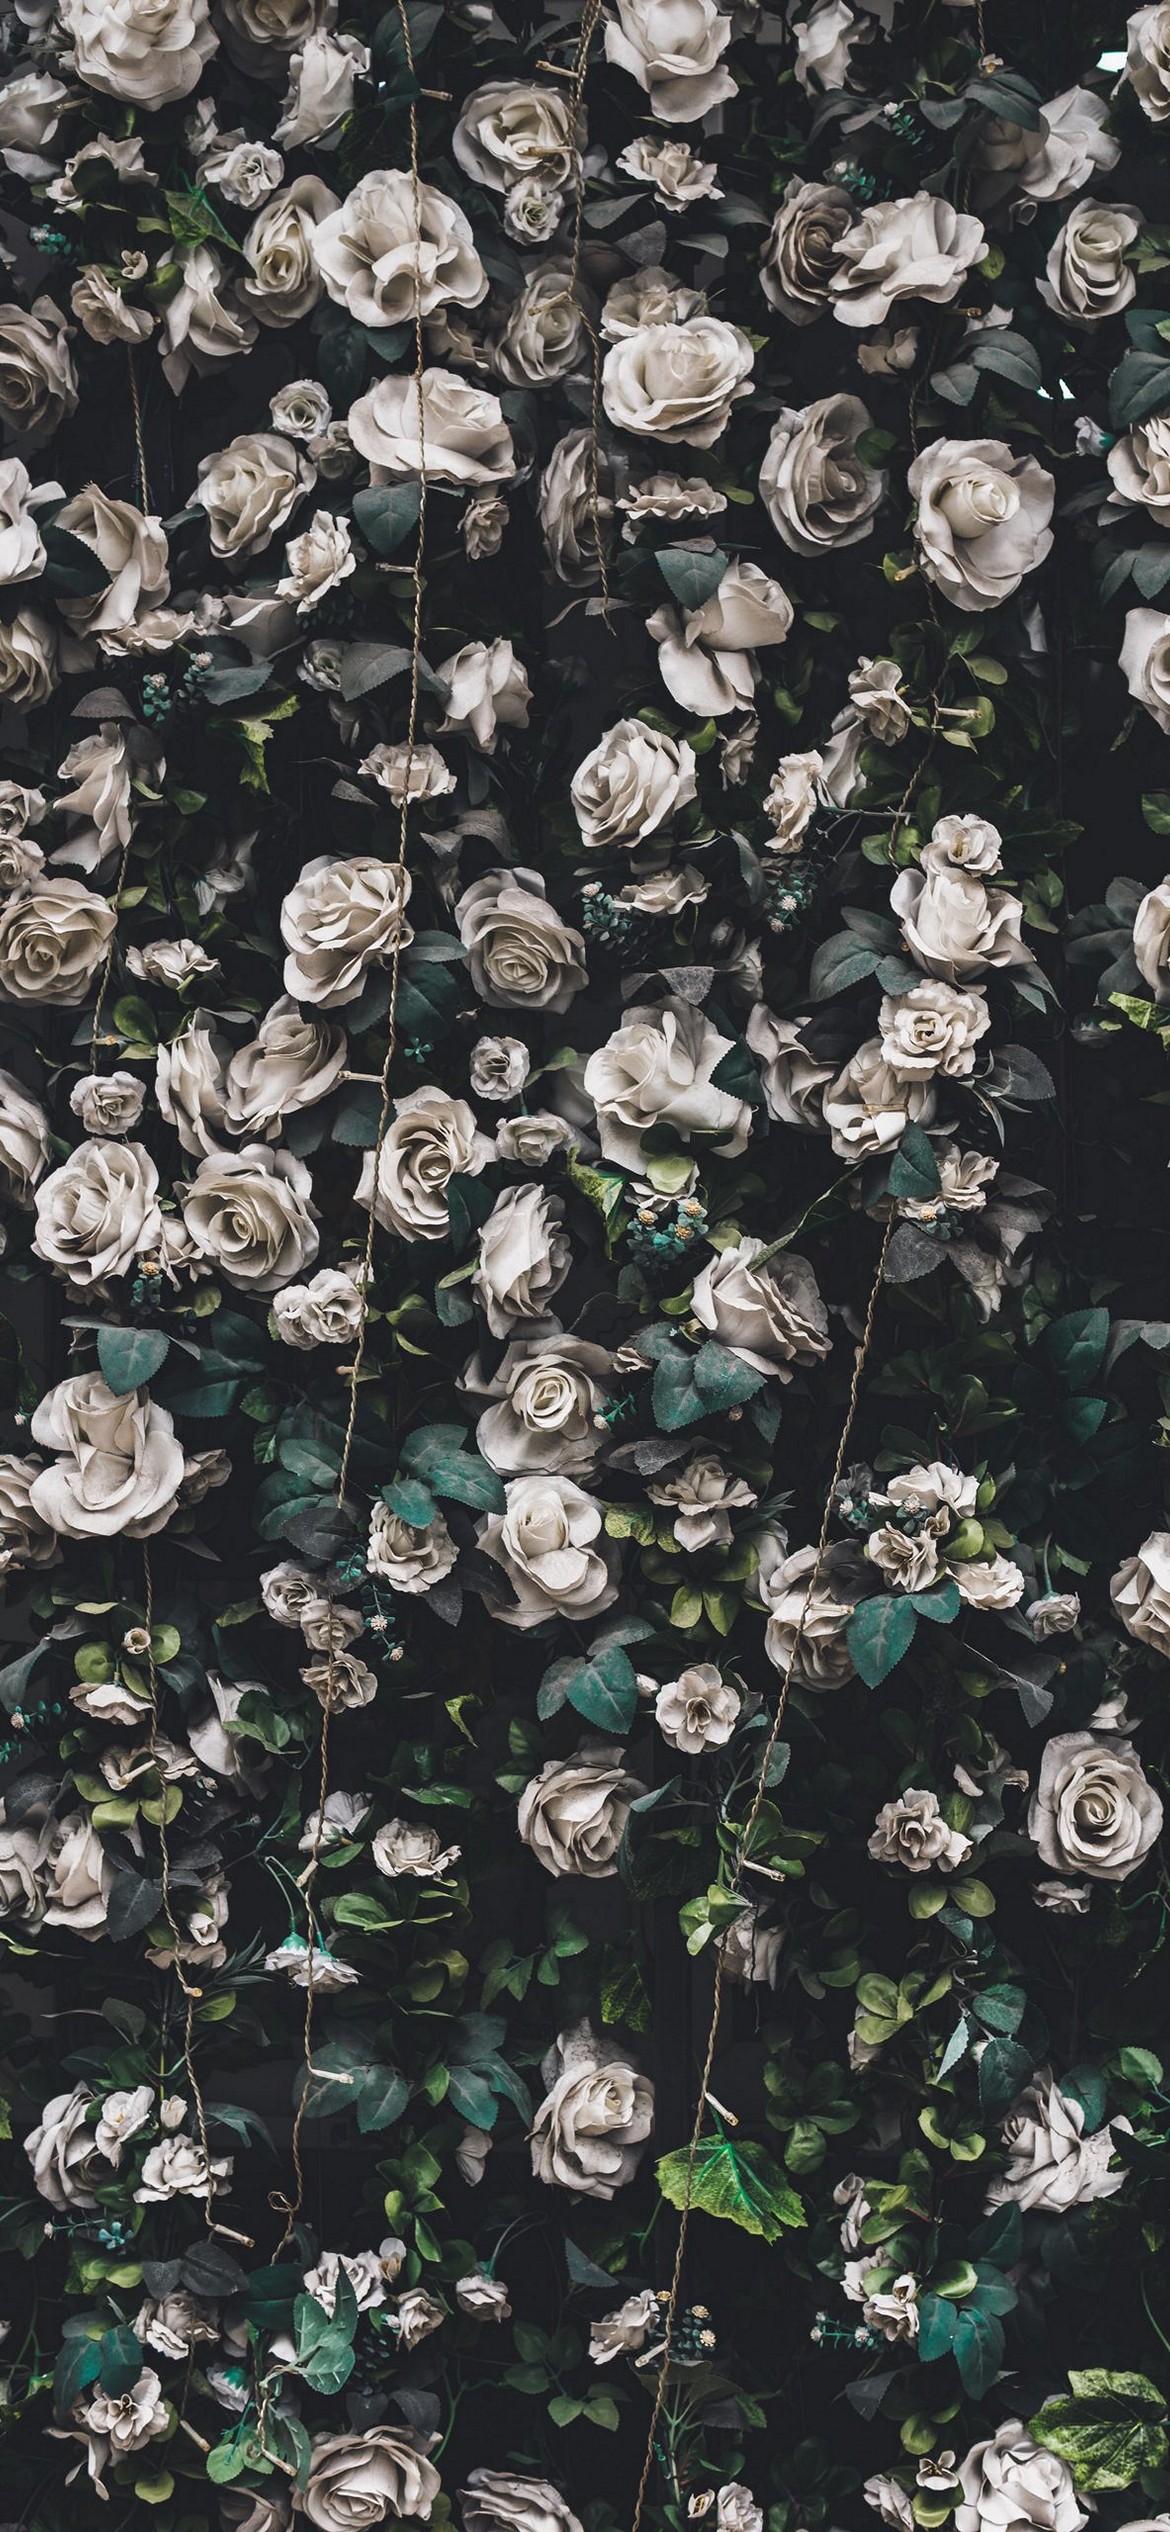 50 Gorgeous Flower Aesthetic Wallpaper for your Iphone  Prada  Pearls